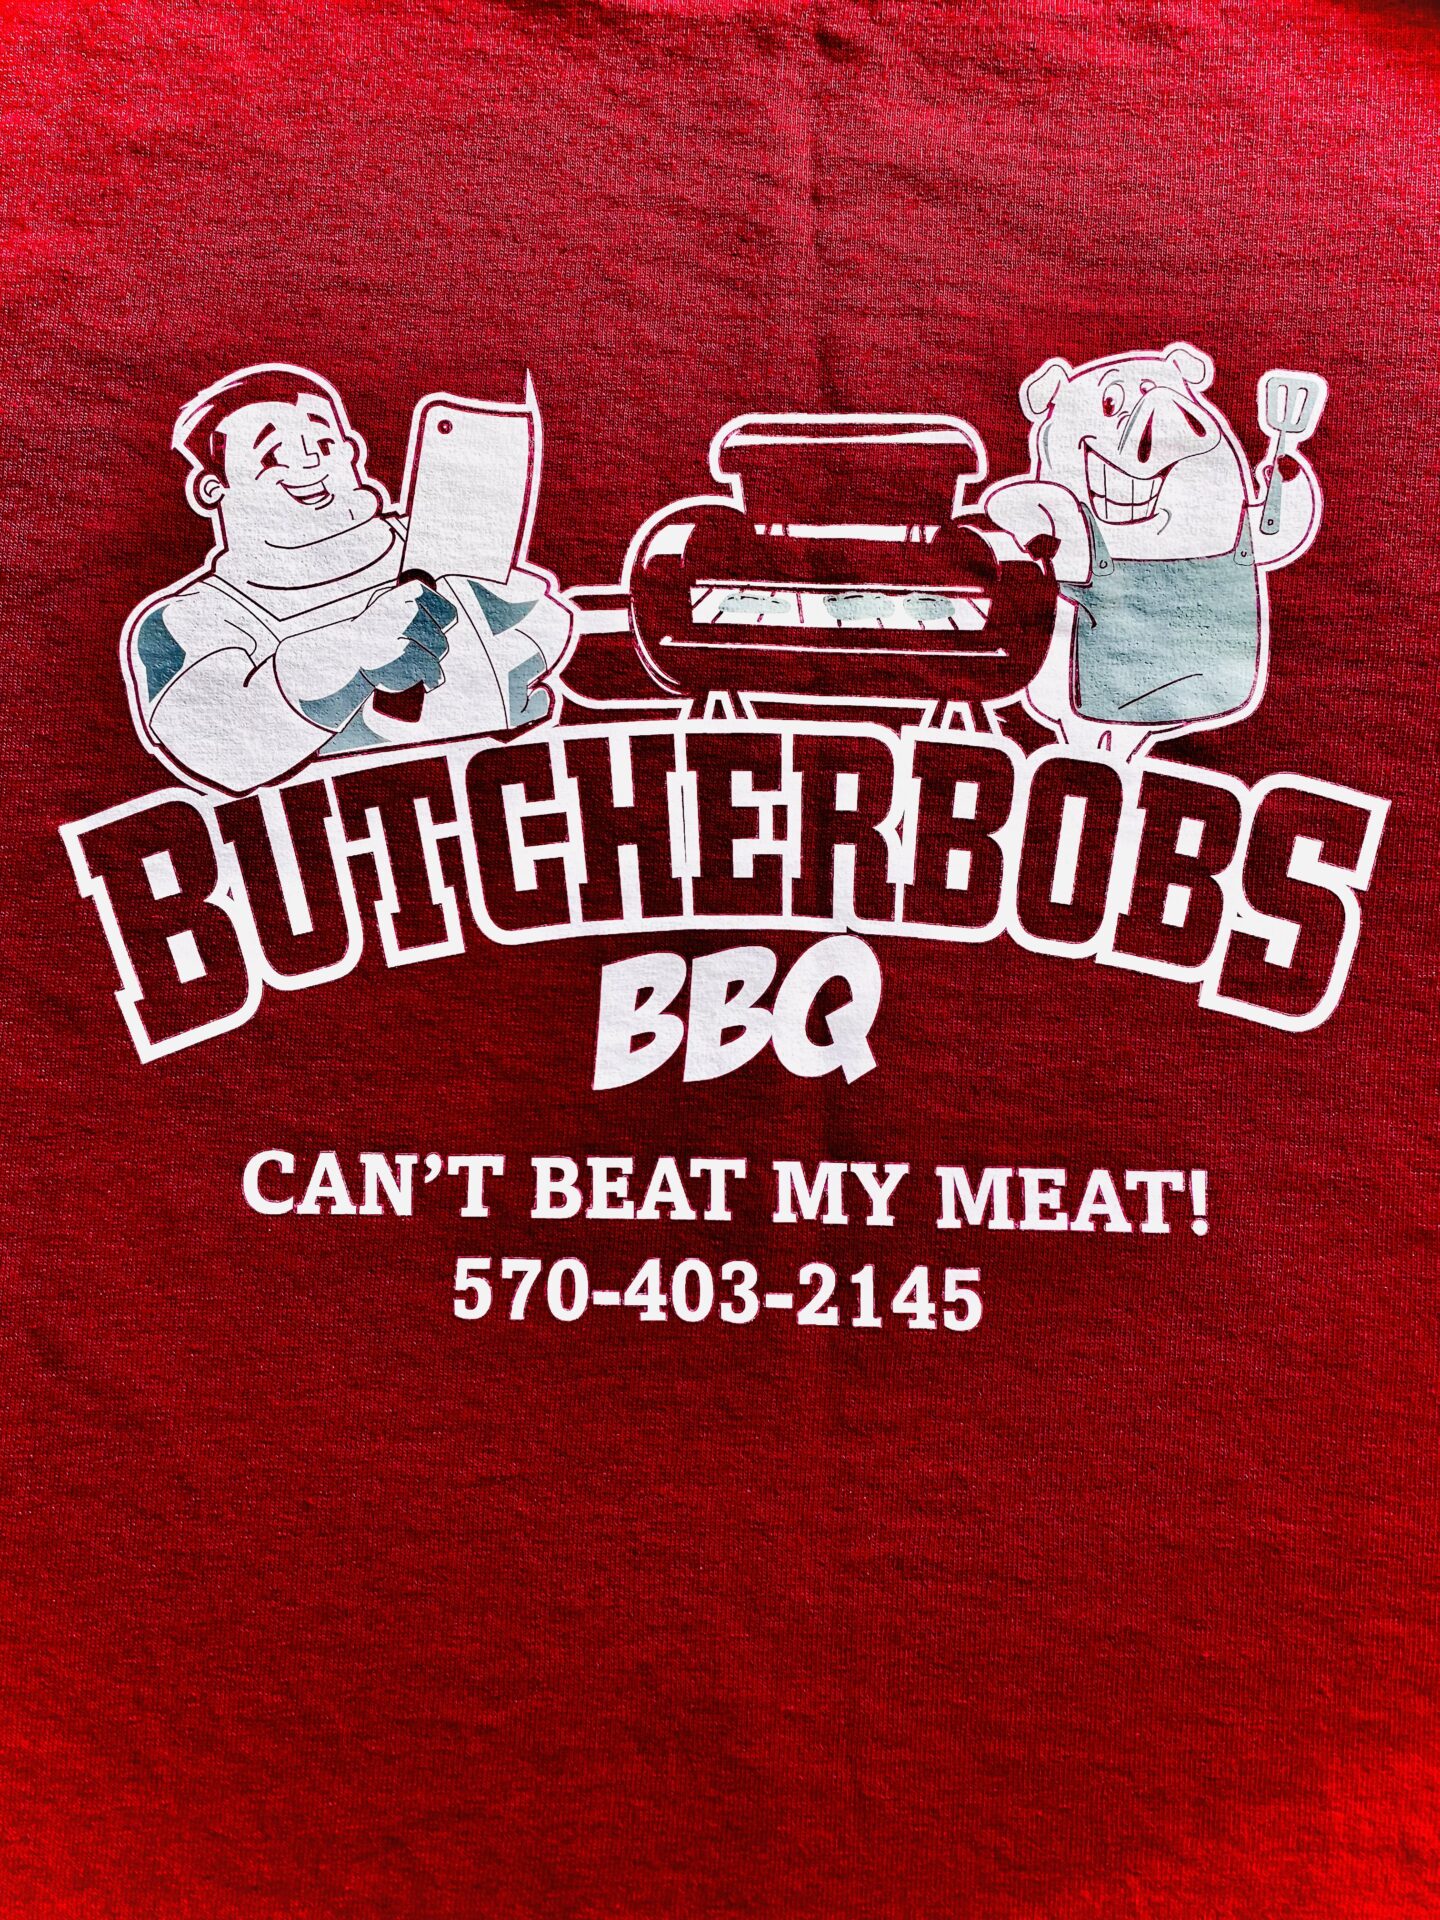 A red shirt with butcherbobs bbq logo on it.